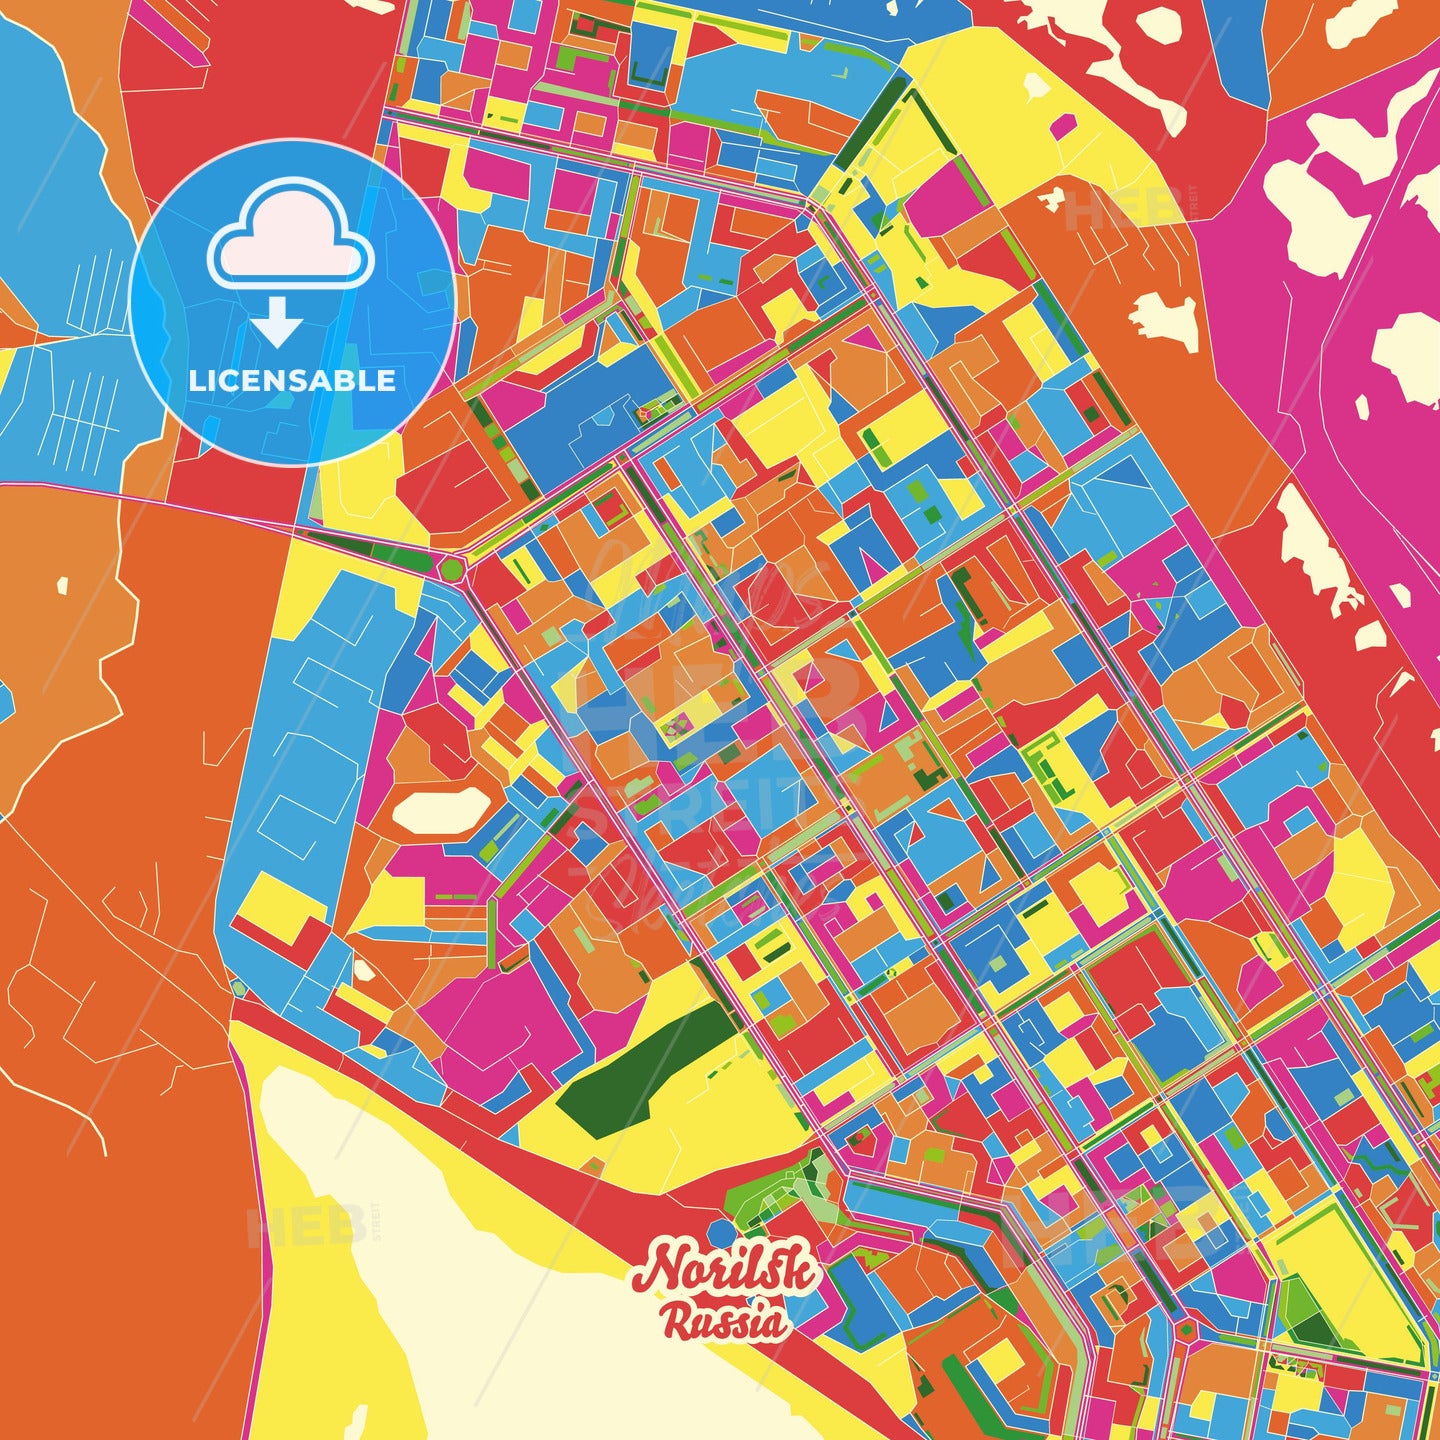 Norilsk, Russia Crazy Colorful Street Map Poster Template - HEBSTREITS Sketches